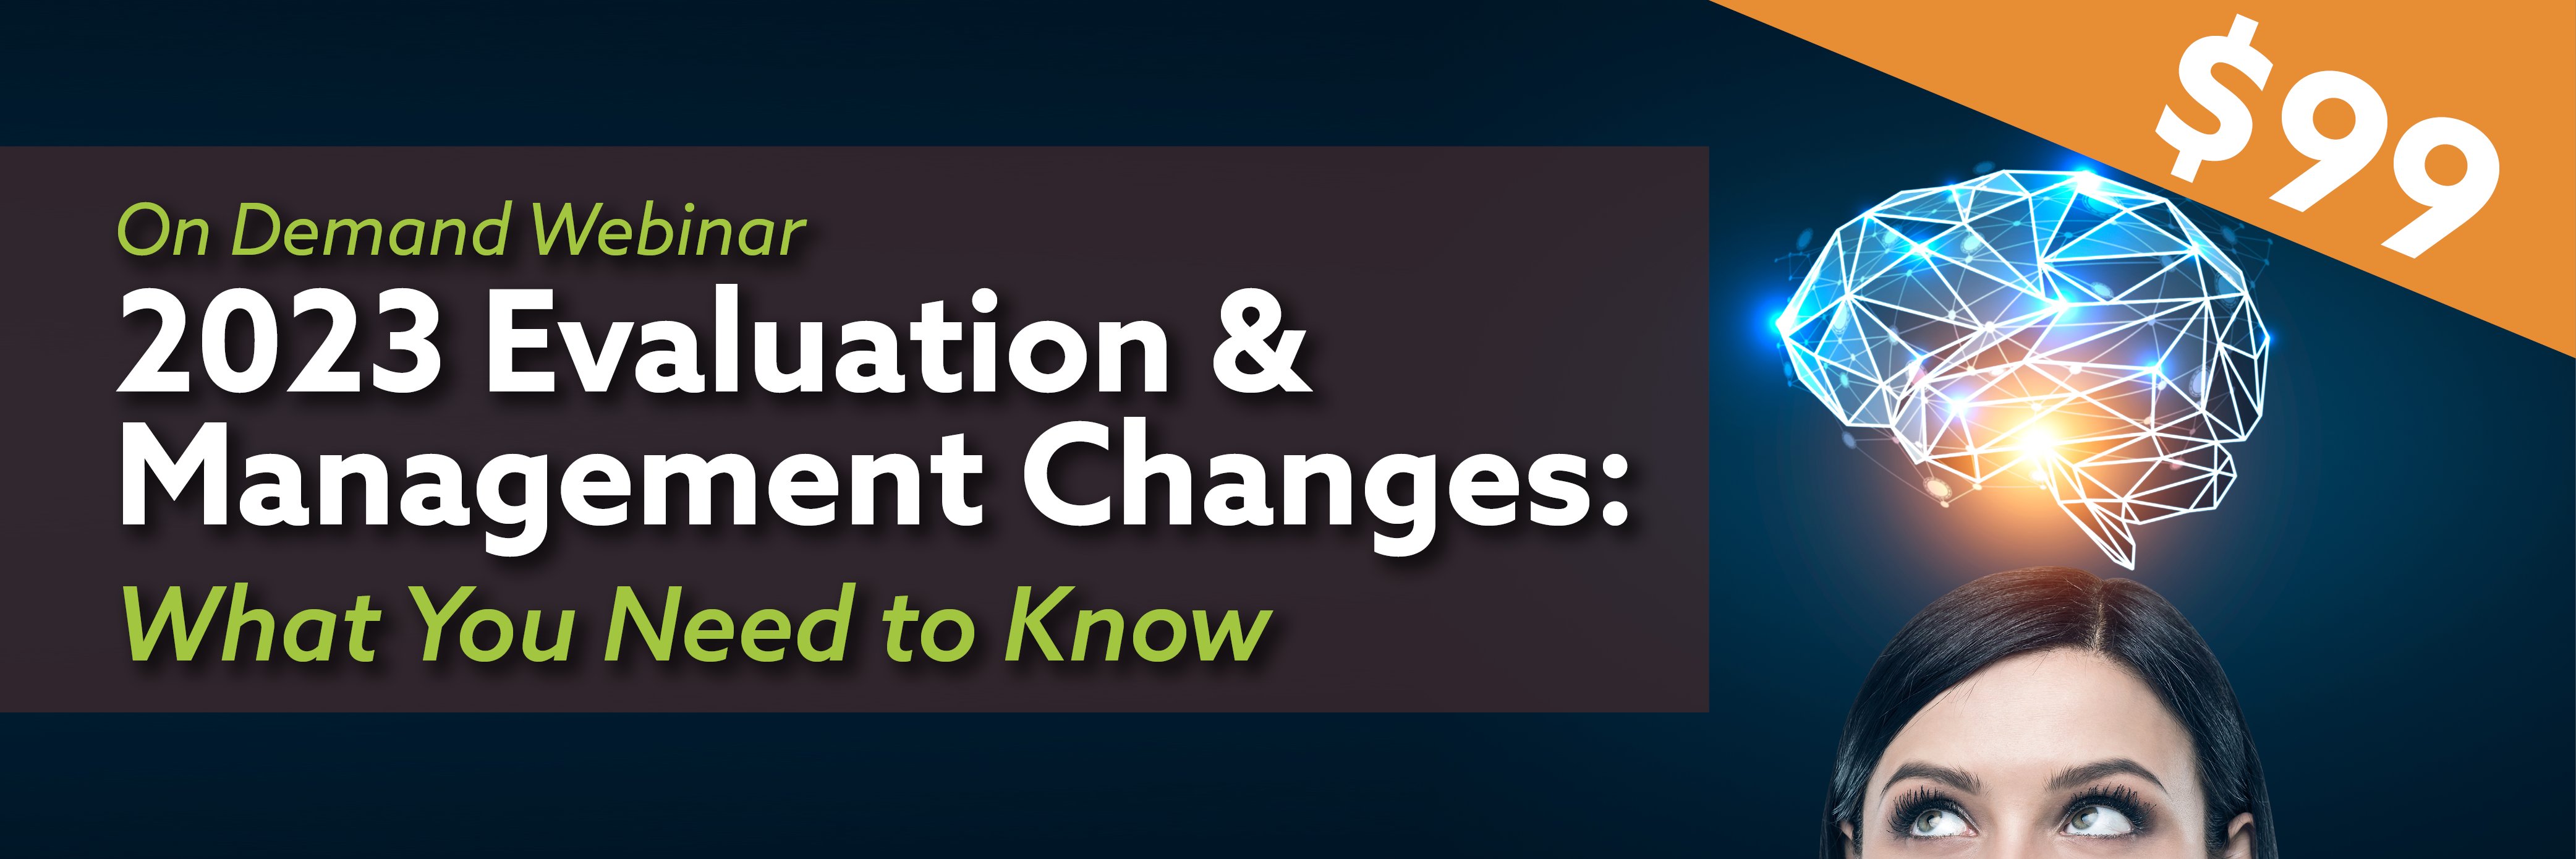 On Demand Webinar, 2023 Evaluation & Management Changes: What you Need to Know